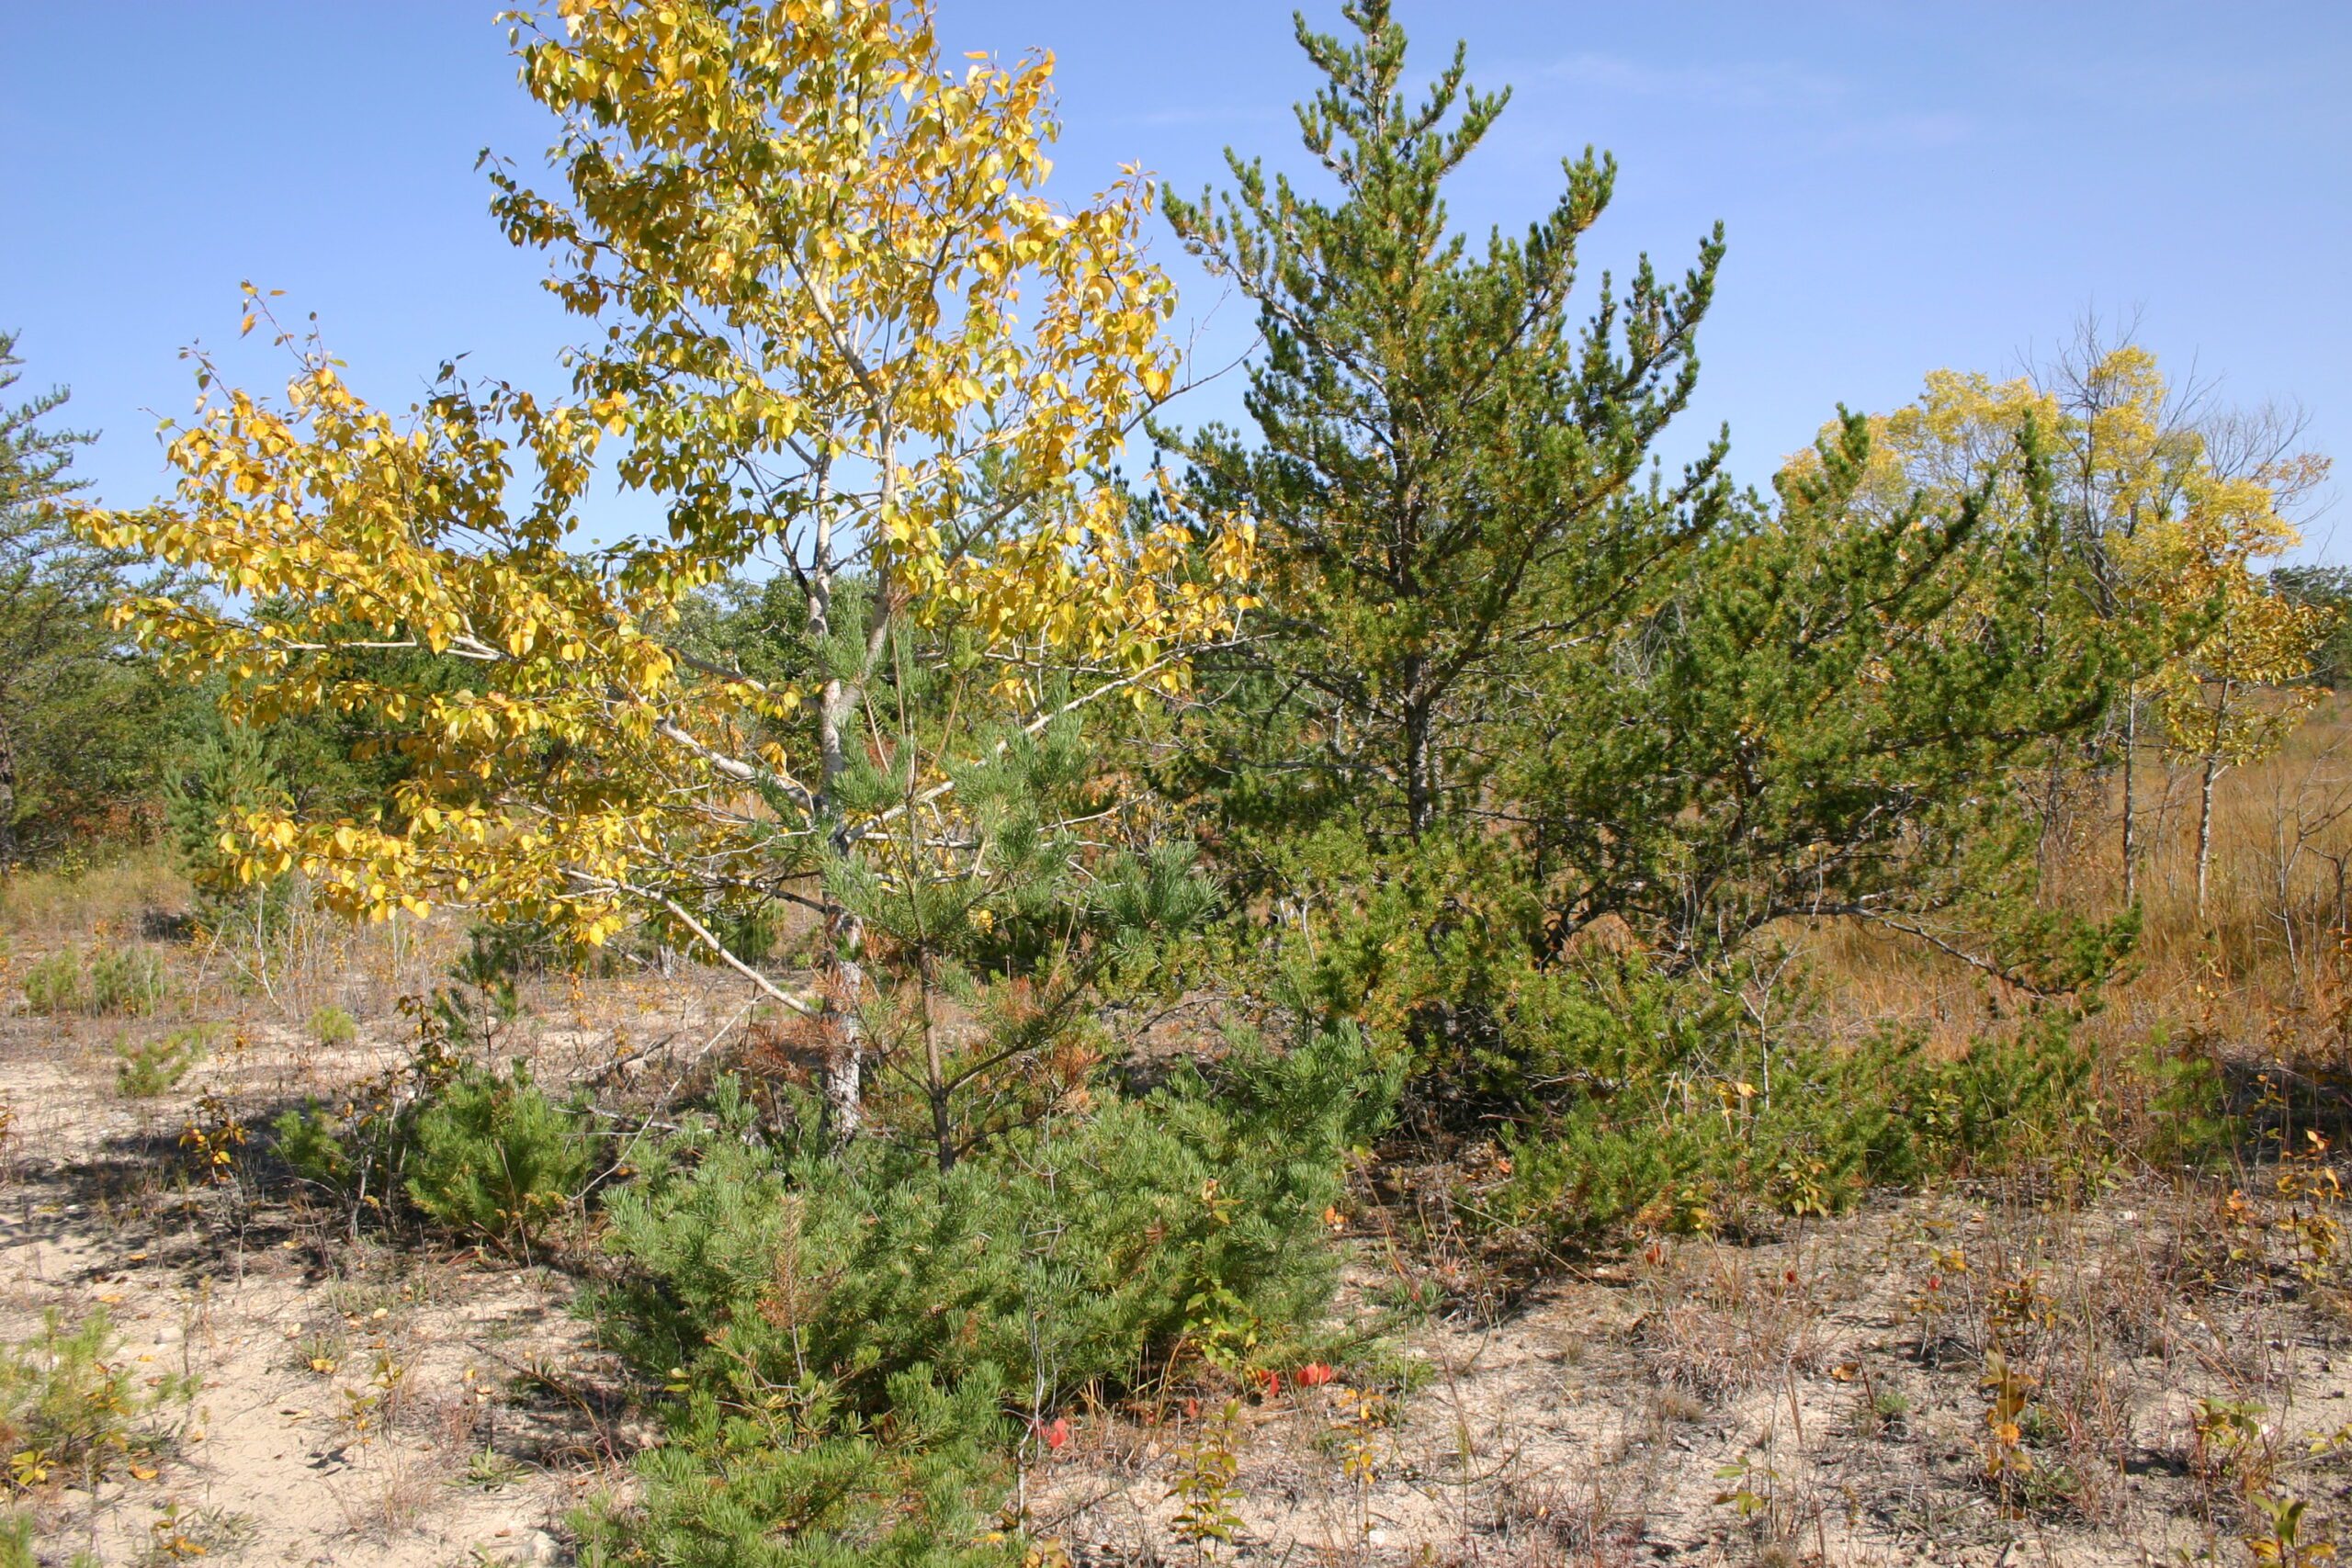 Two different looking trees growing next to each other in sandy soil. On the left is a yellow-leaves tree with light bark on the trunk. On the right is a bushy green conifer tree.